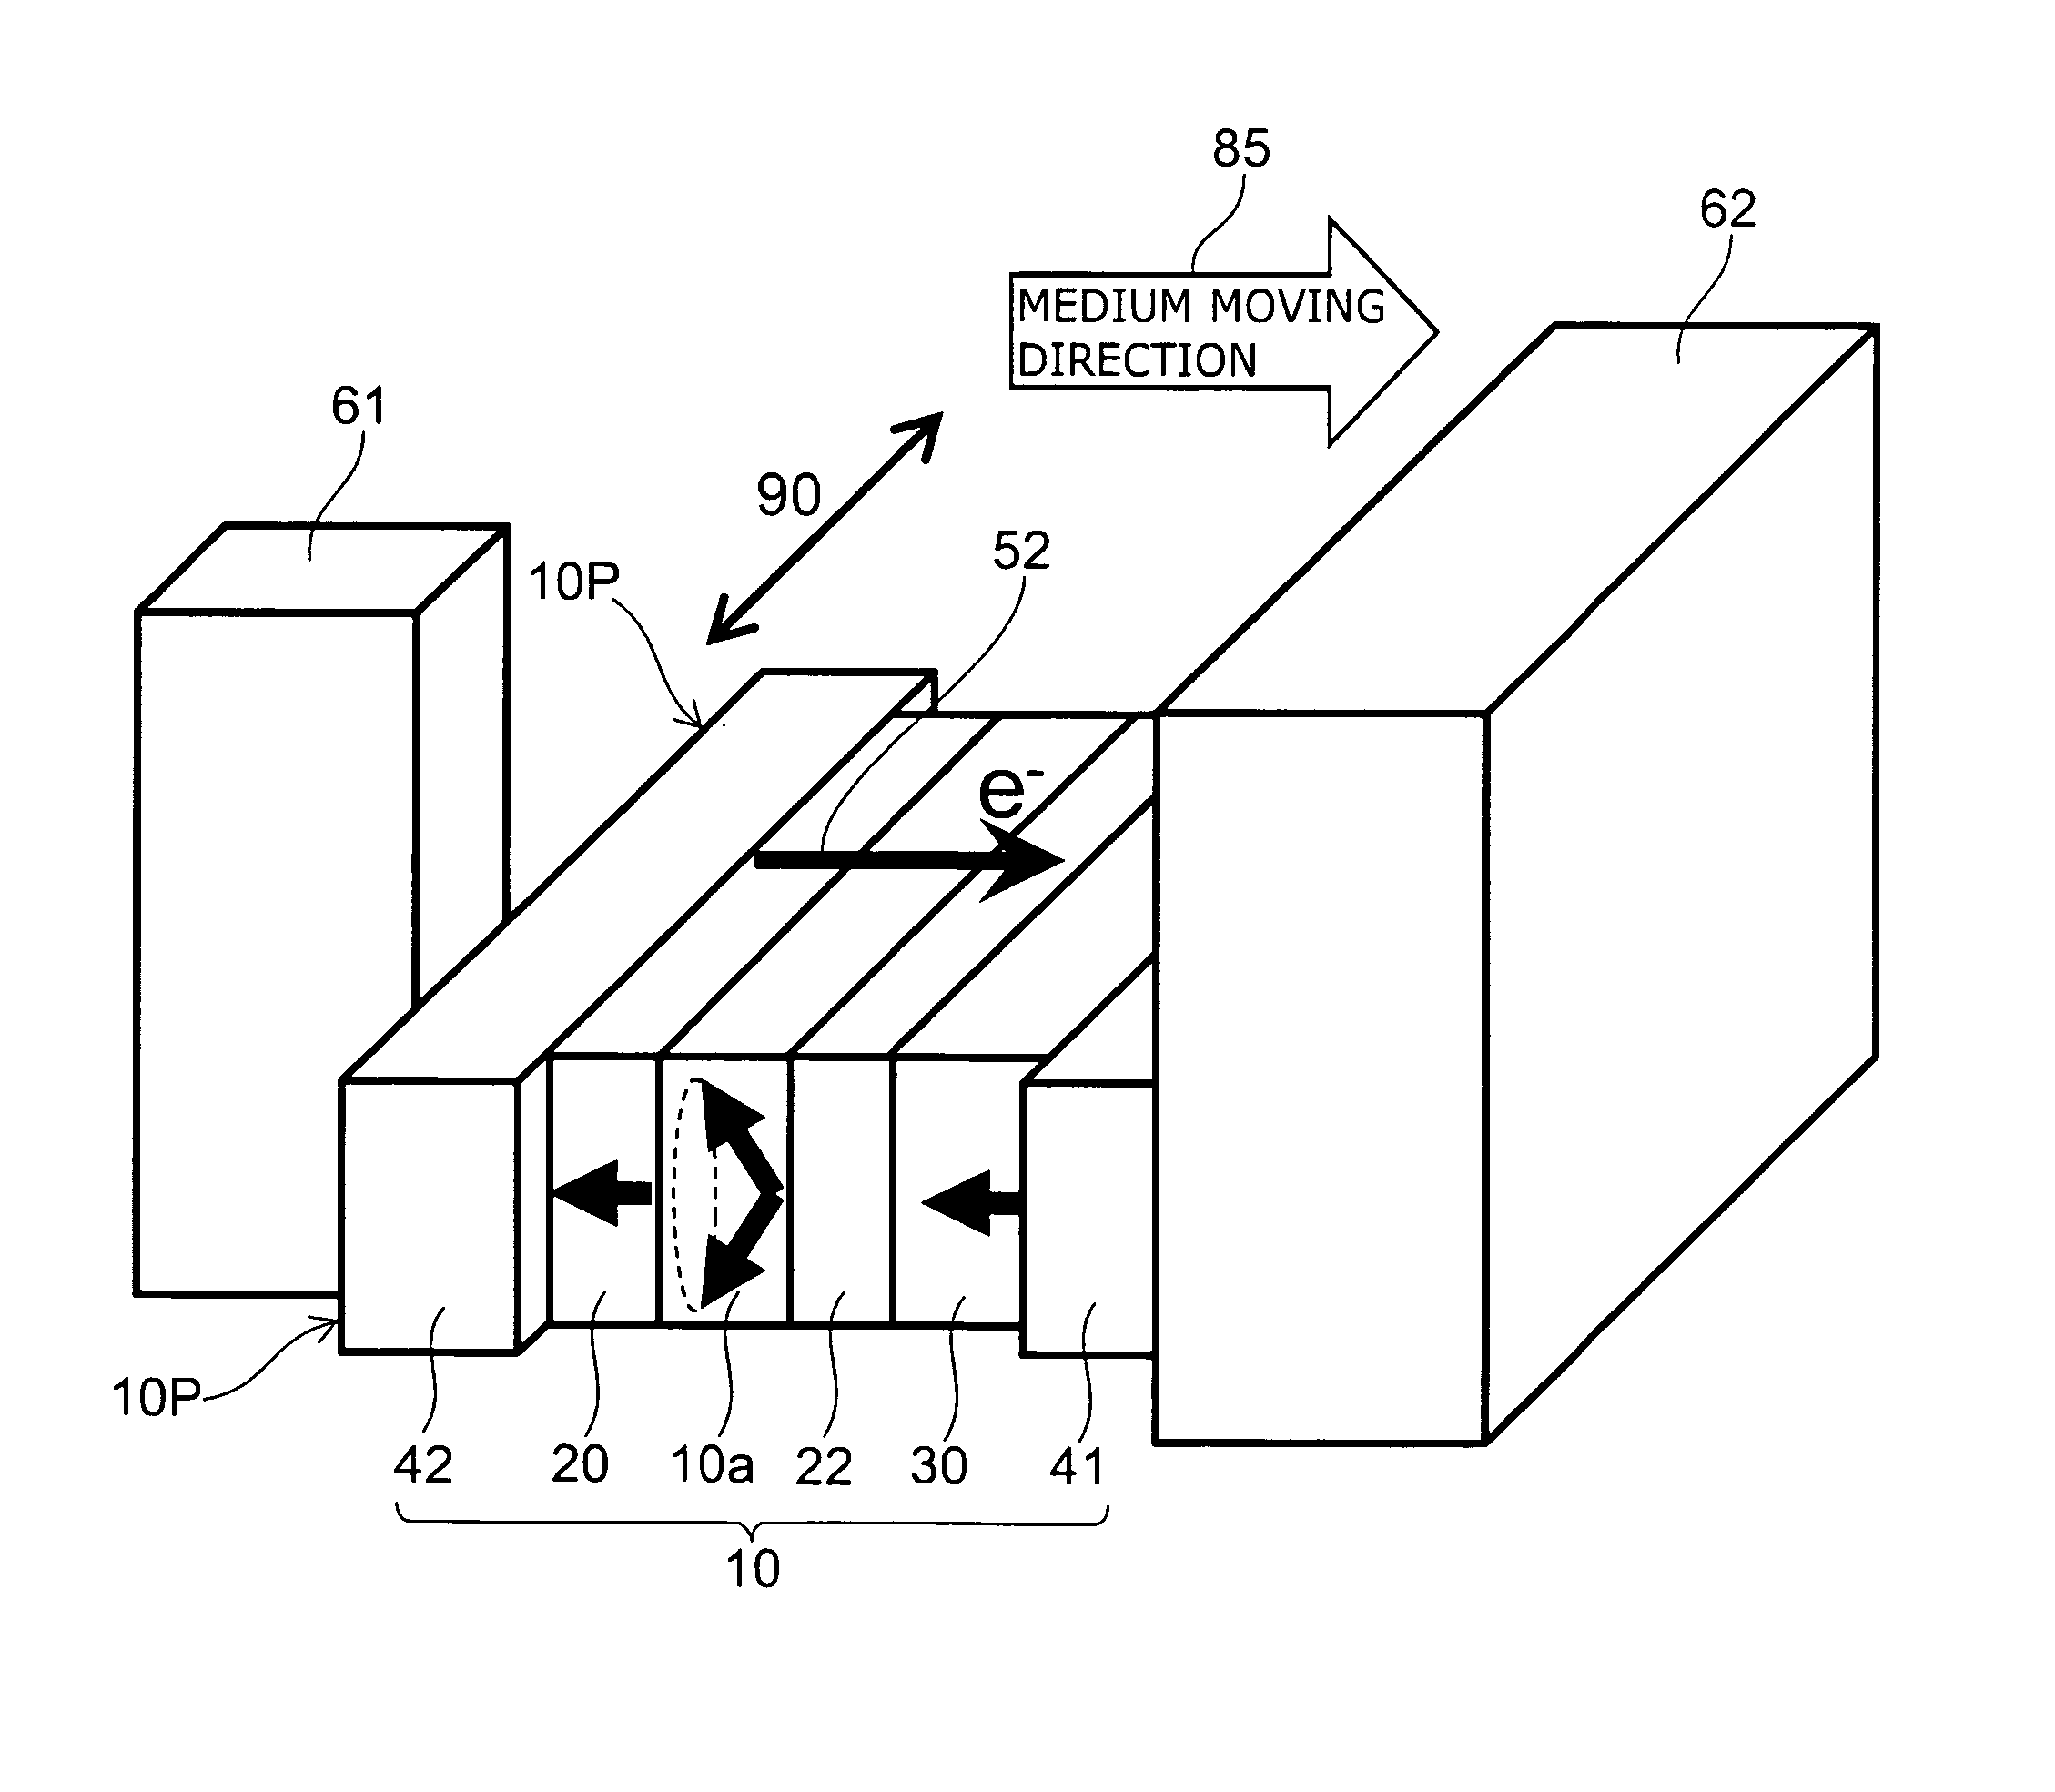 Magnetic recording head with protruding spin torque oscillator